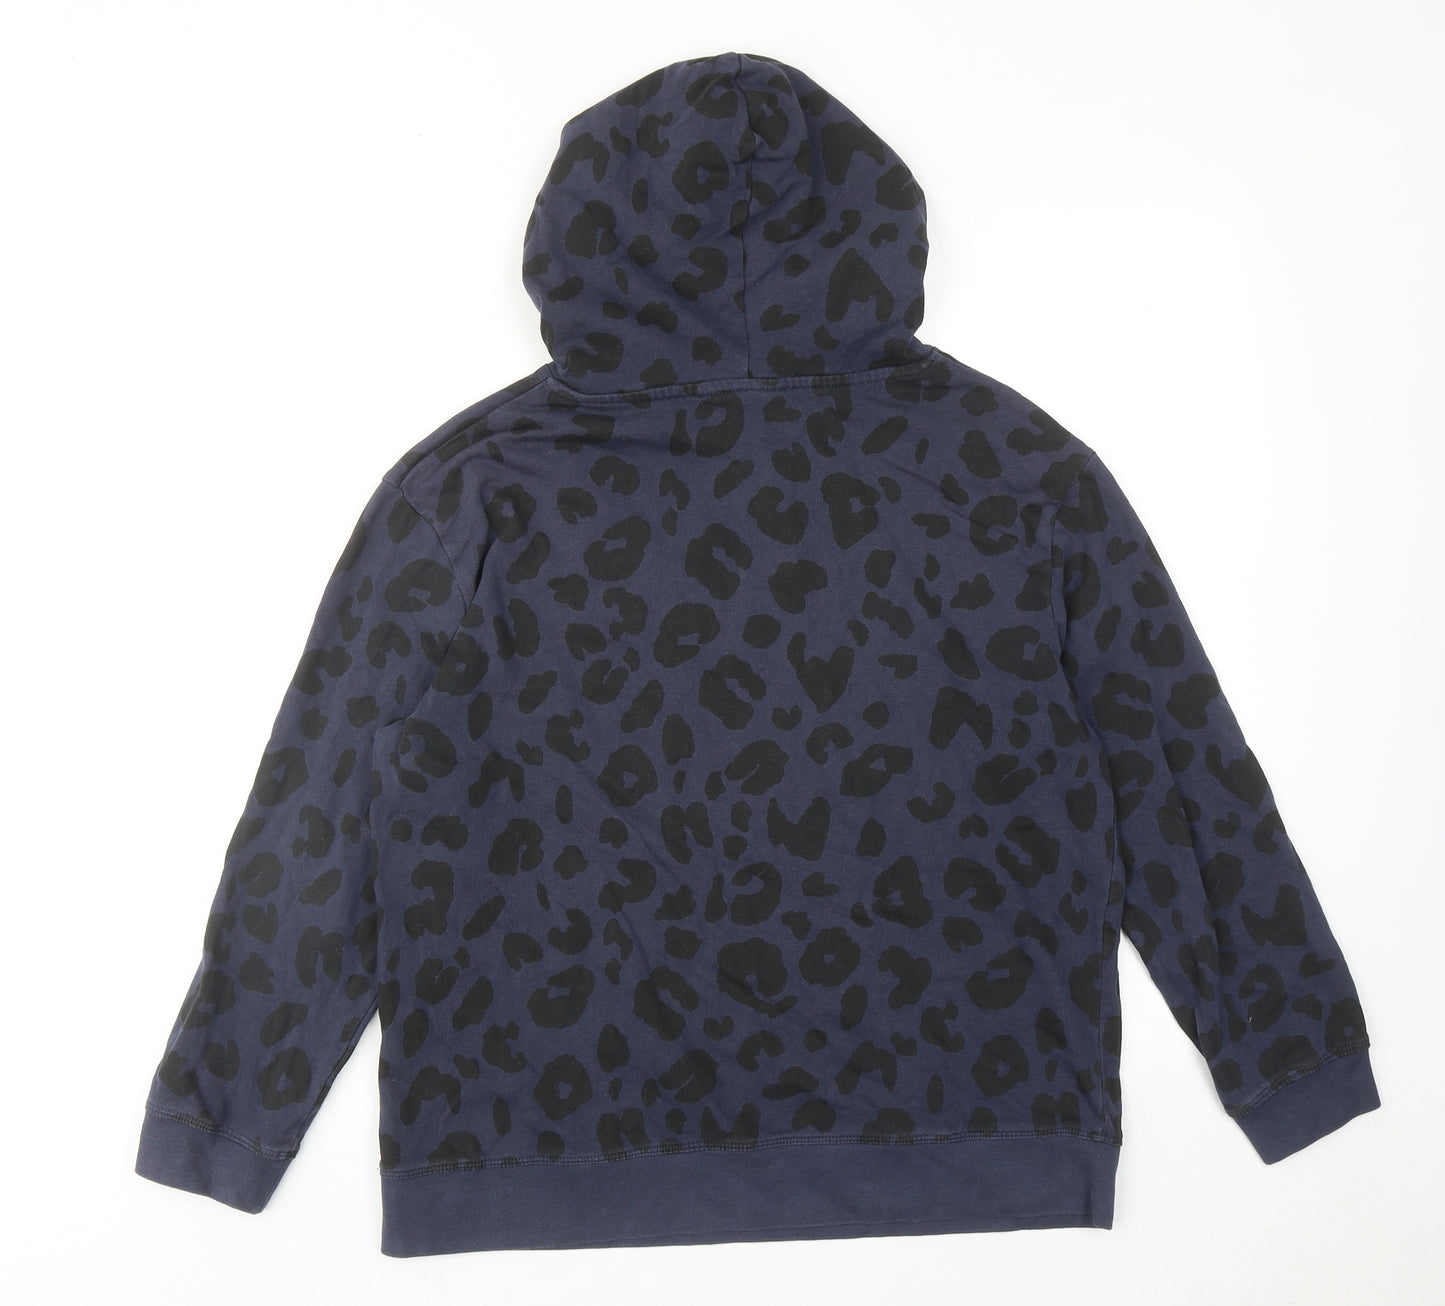 John Lewis Womens Blue Animal Print Cotton Pullover Hoodie Size S Pullover - Leopard pattern